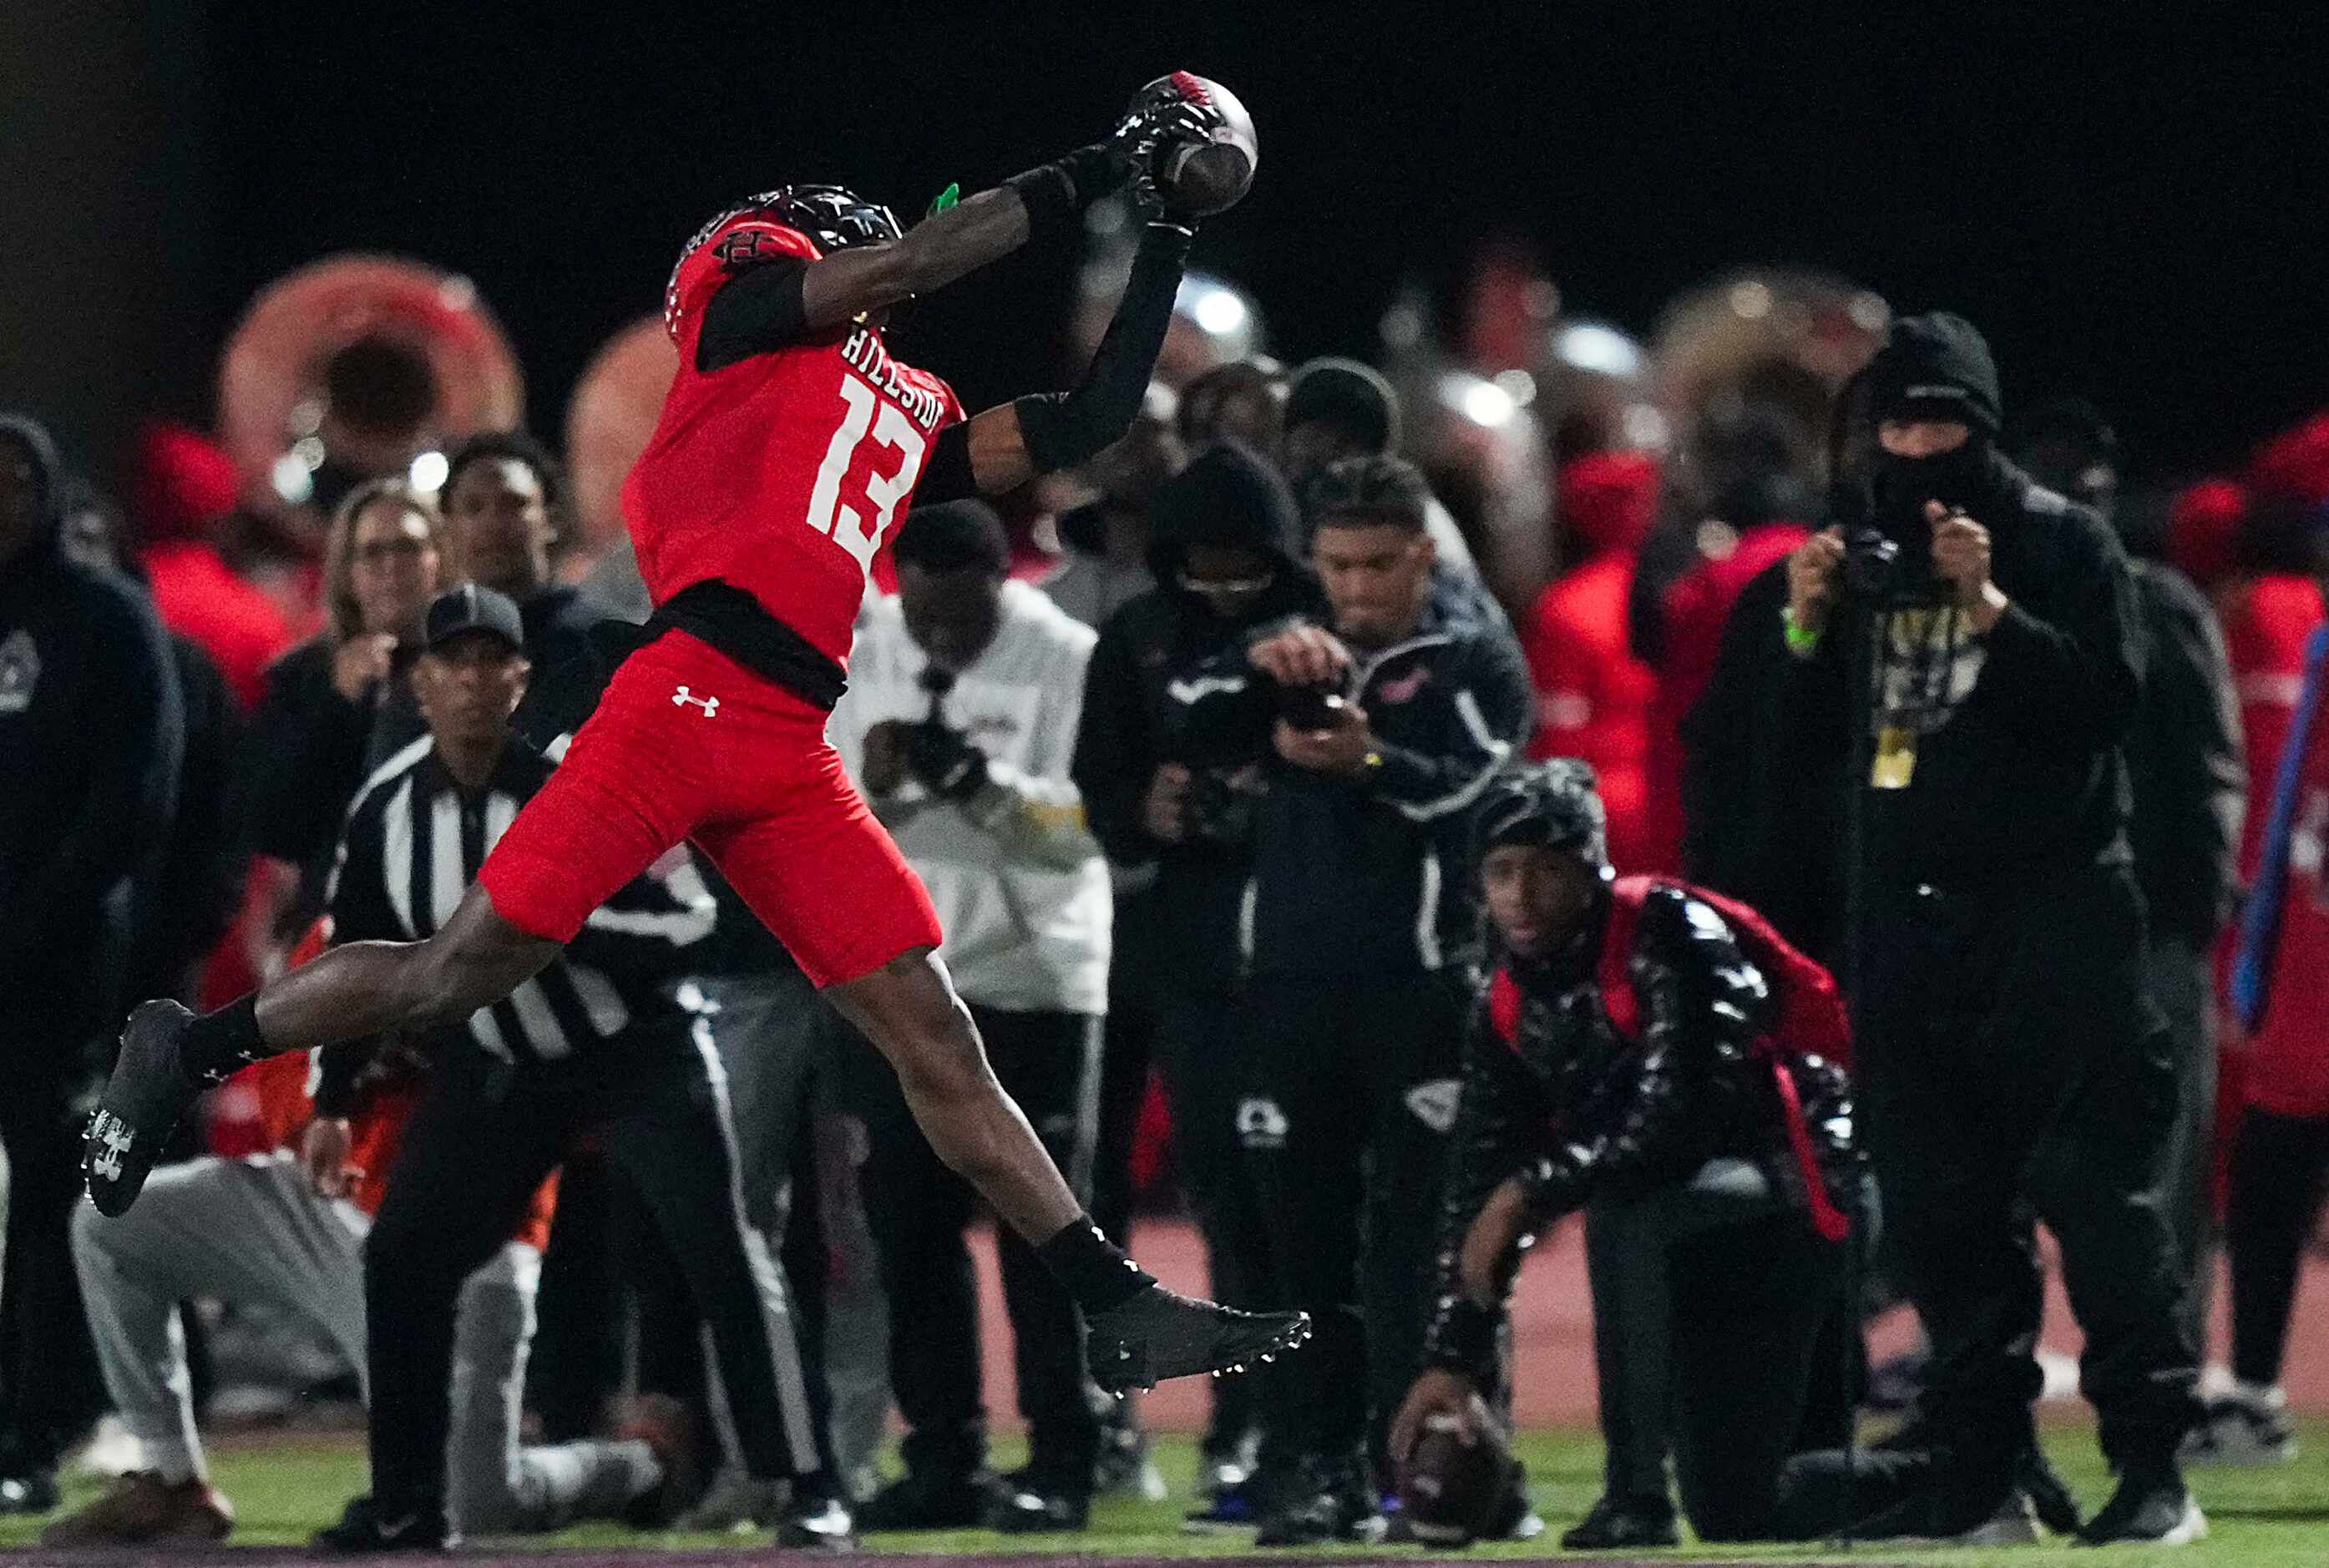 Cedar Hill wide receiver Le’keldrick Bridges (13) makes a leaping catch during the first...